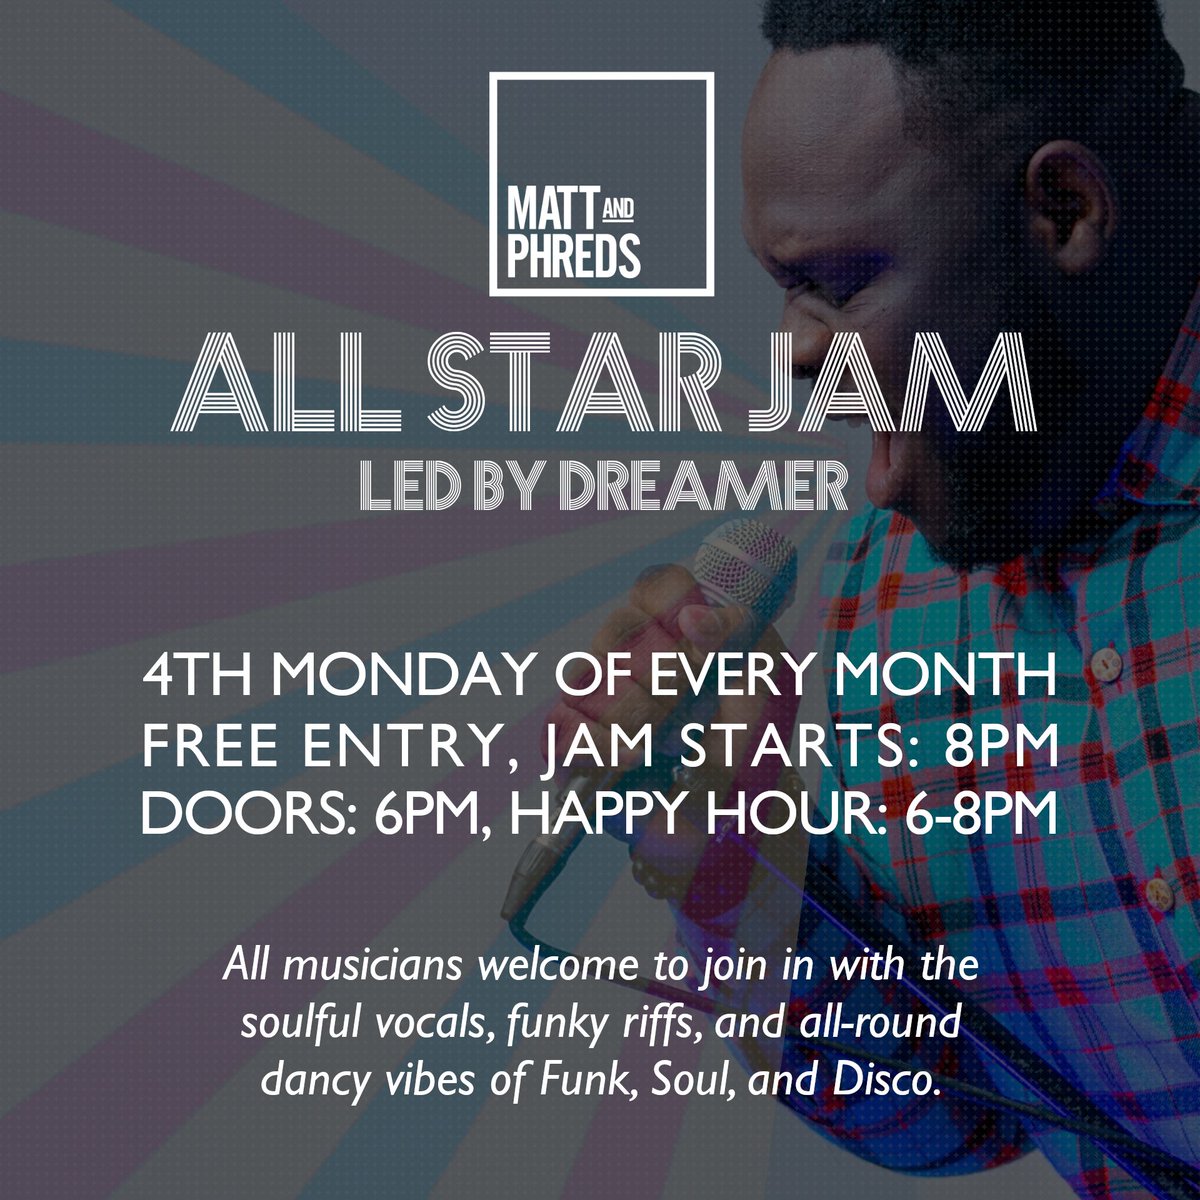 #TONIGHT: ALL STAR JAM, led by Dreamer #Monday 22 April | Doors 6pm | Happy Hour 6-8pm | Jam: 8-11pm | Free Entry All musicians & singers welcome to perform with the house band & other jammers, playing #Soul, #Funk, #Disco & everything in between! #Manchester #LiveMusic